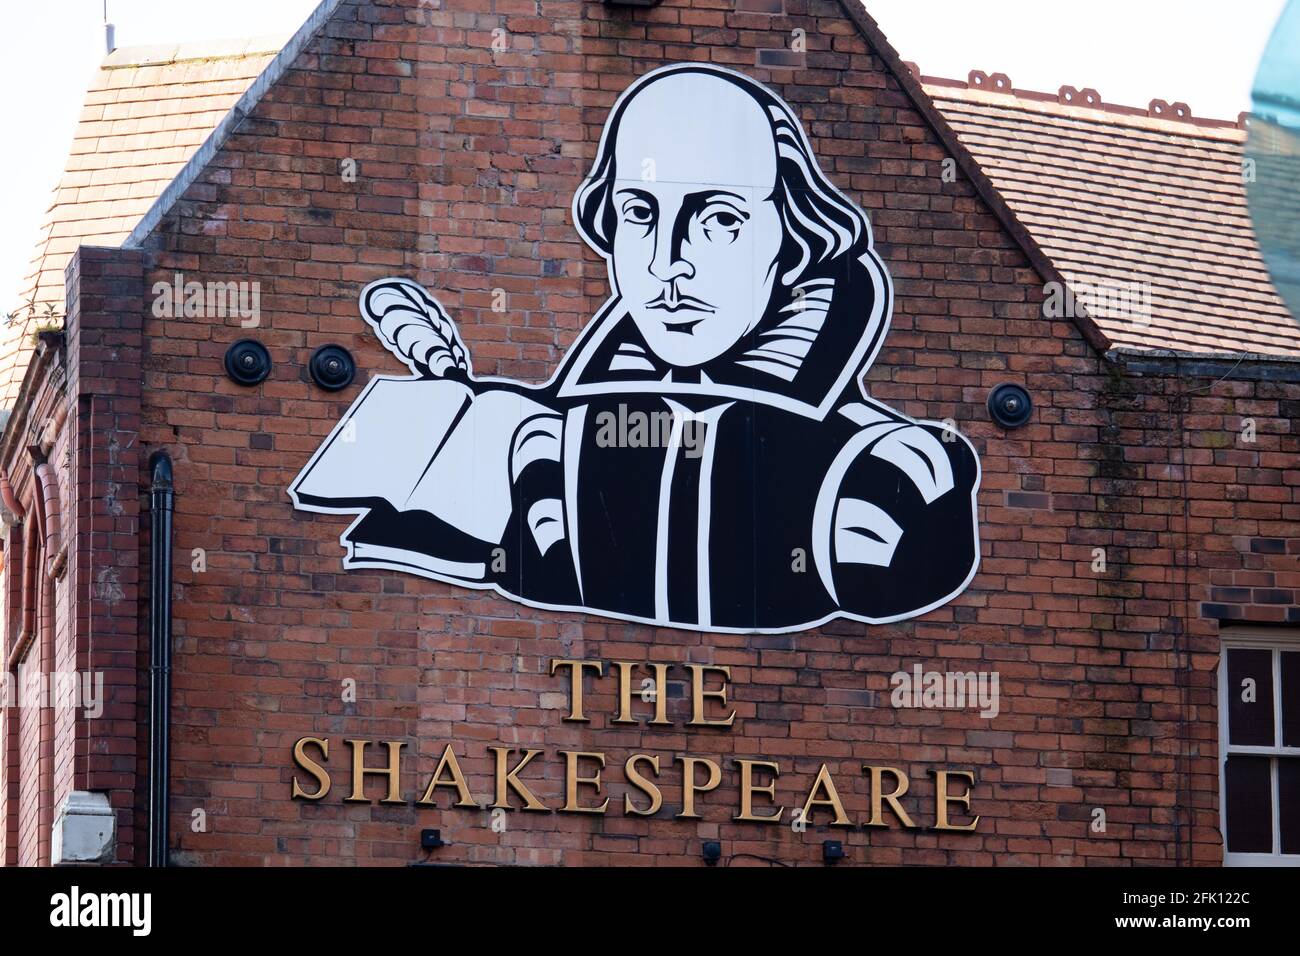 The Shakespeare Inn located on the corner of Summer Row and Lionel Street, Birmingham. Established in 1873. The nearby New Central Library houses a collection of Shakespeare books and memorabillia. Stock Photo